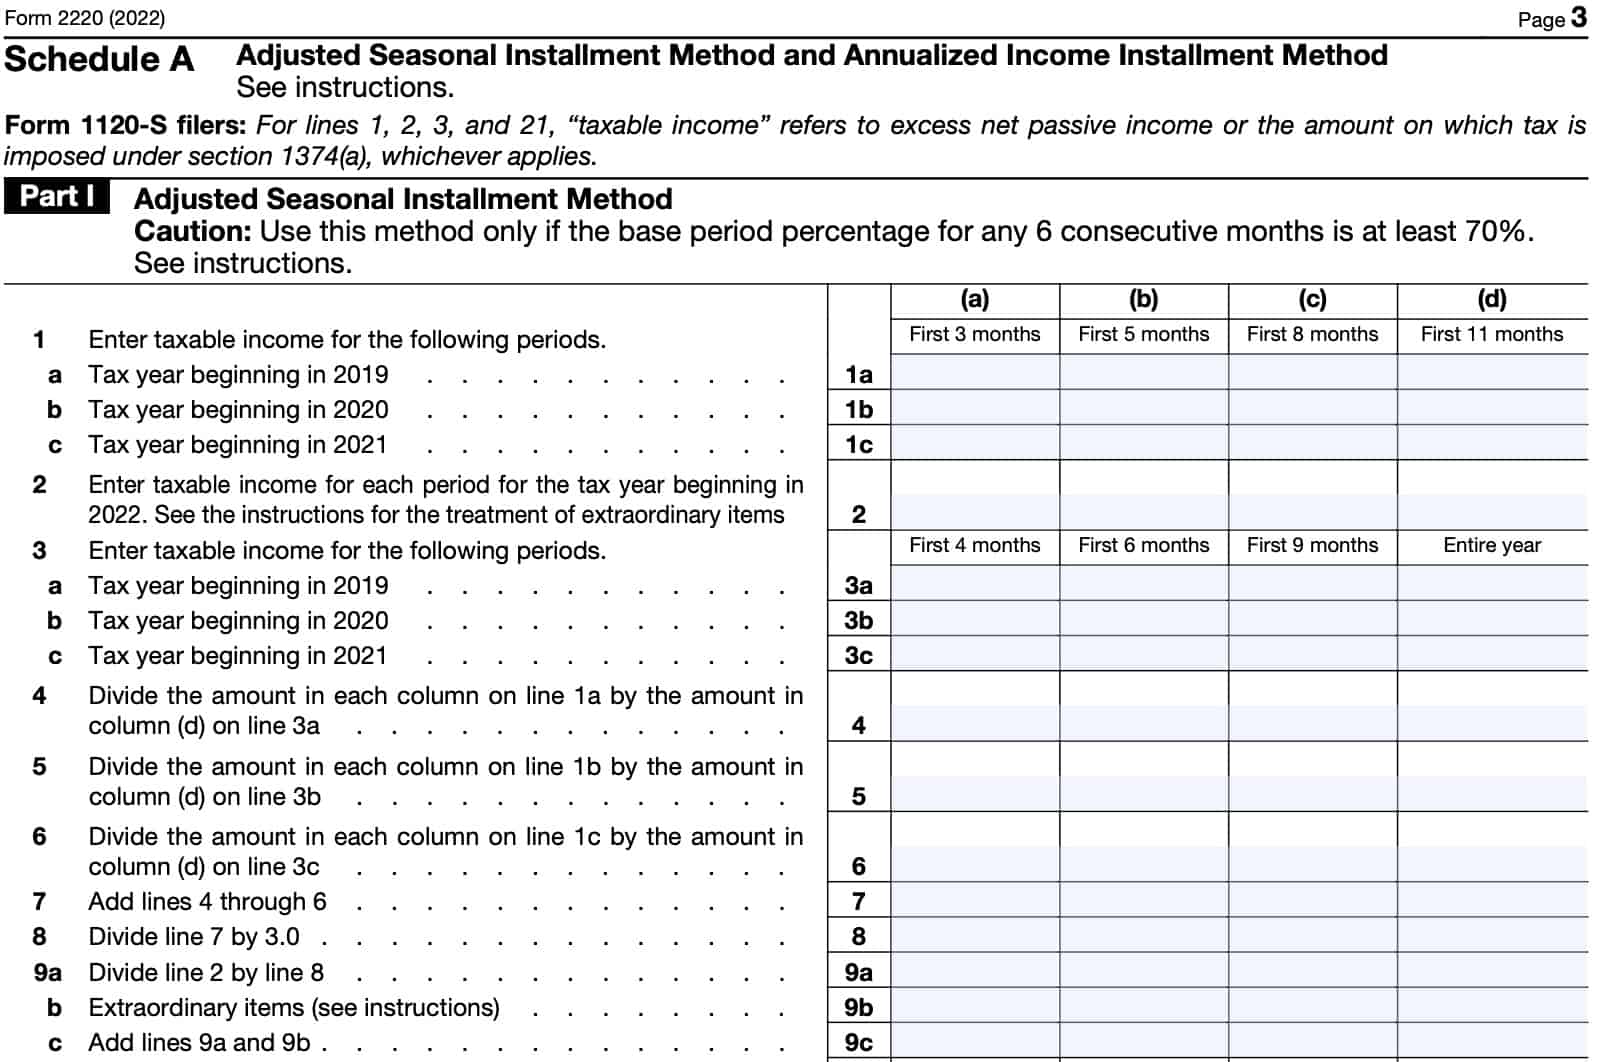 IRS Form 2220, Schedule A, Part I: Adjusted Seasonal Installment Method